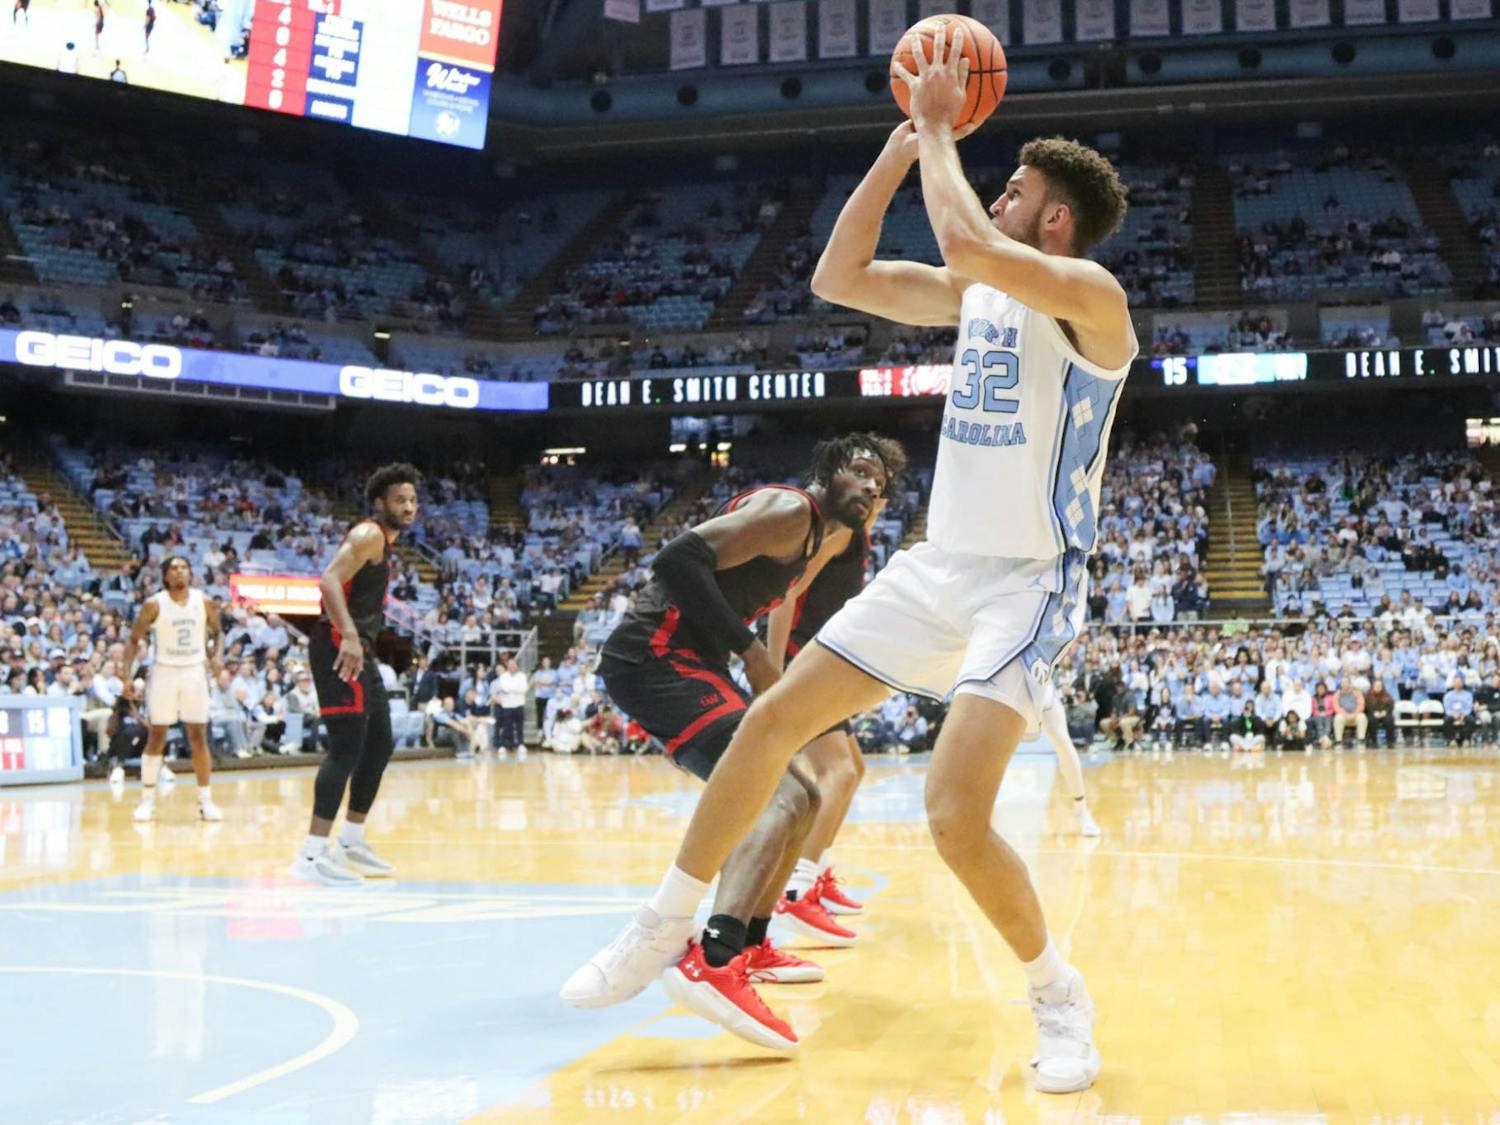 UNC graduate forward Pete Nance (32) shoots the ball during the men's basketball game against Gardner-Webb at the Dean Smith Center on Tuesday, Nov. 15, 2022. UNC beat Gardner-Webb 72-66.